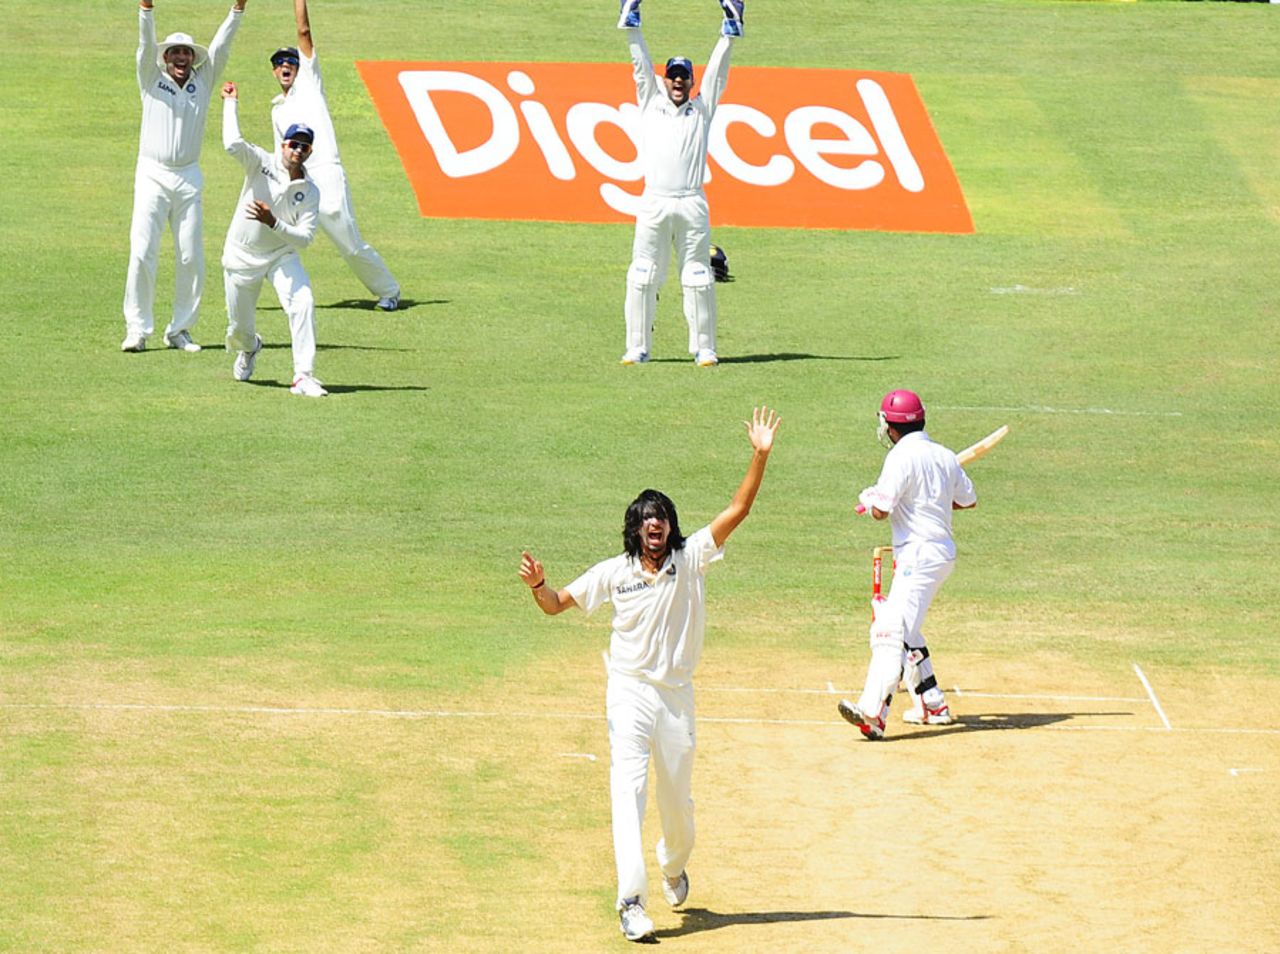 India appeal successfully for an lbw against Ramnaresh Sarwan, West Indies v India, 1st Test, Kingston, 2nd day, June 21, 2011